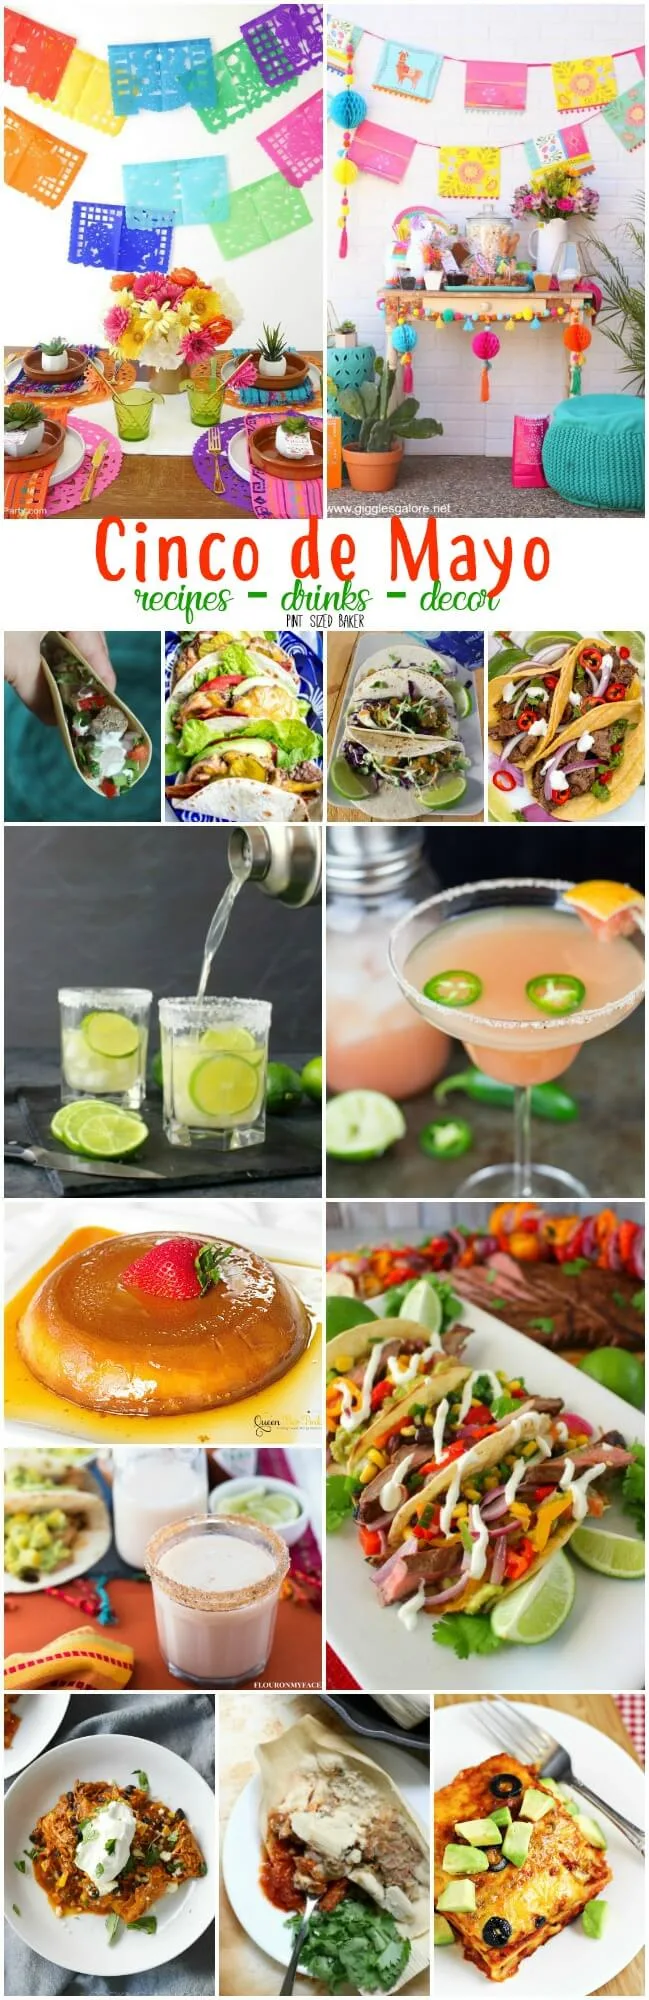 It's time for Cinco de Mayo - recipes, drinks, decor! you can find it all in one place. Decor idea for your party. Recipes for tacos, fajitas, tamales, flan, margaritas and more! 